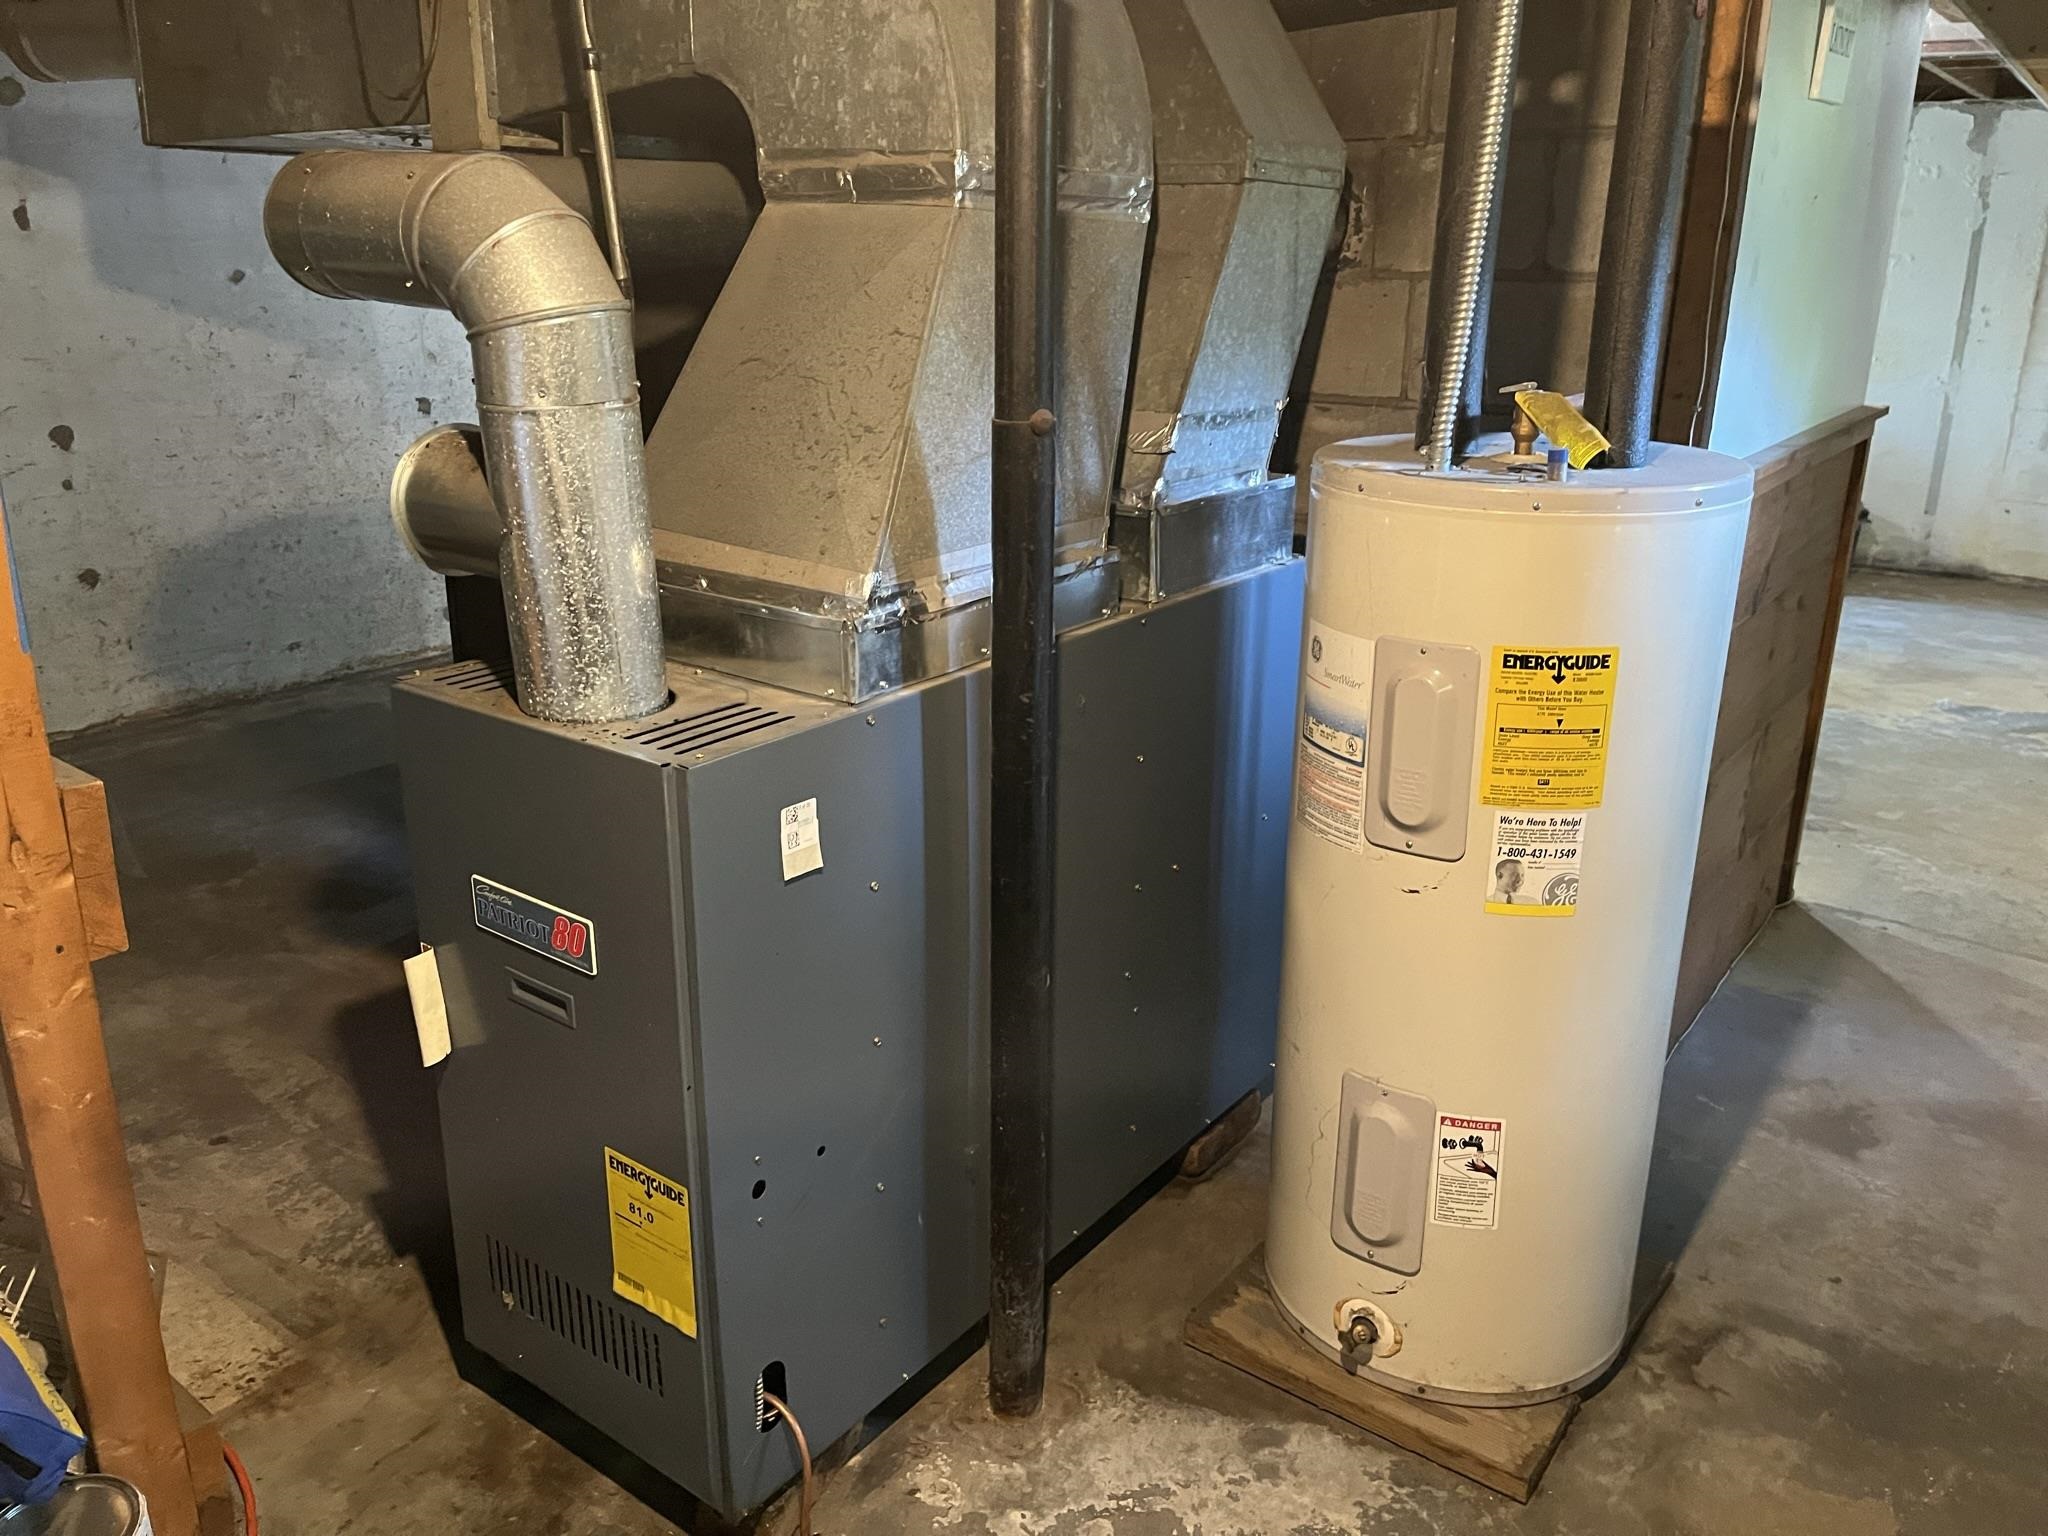 Updated Heating system and water heater